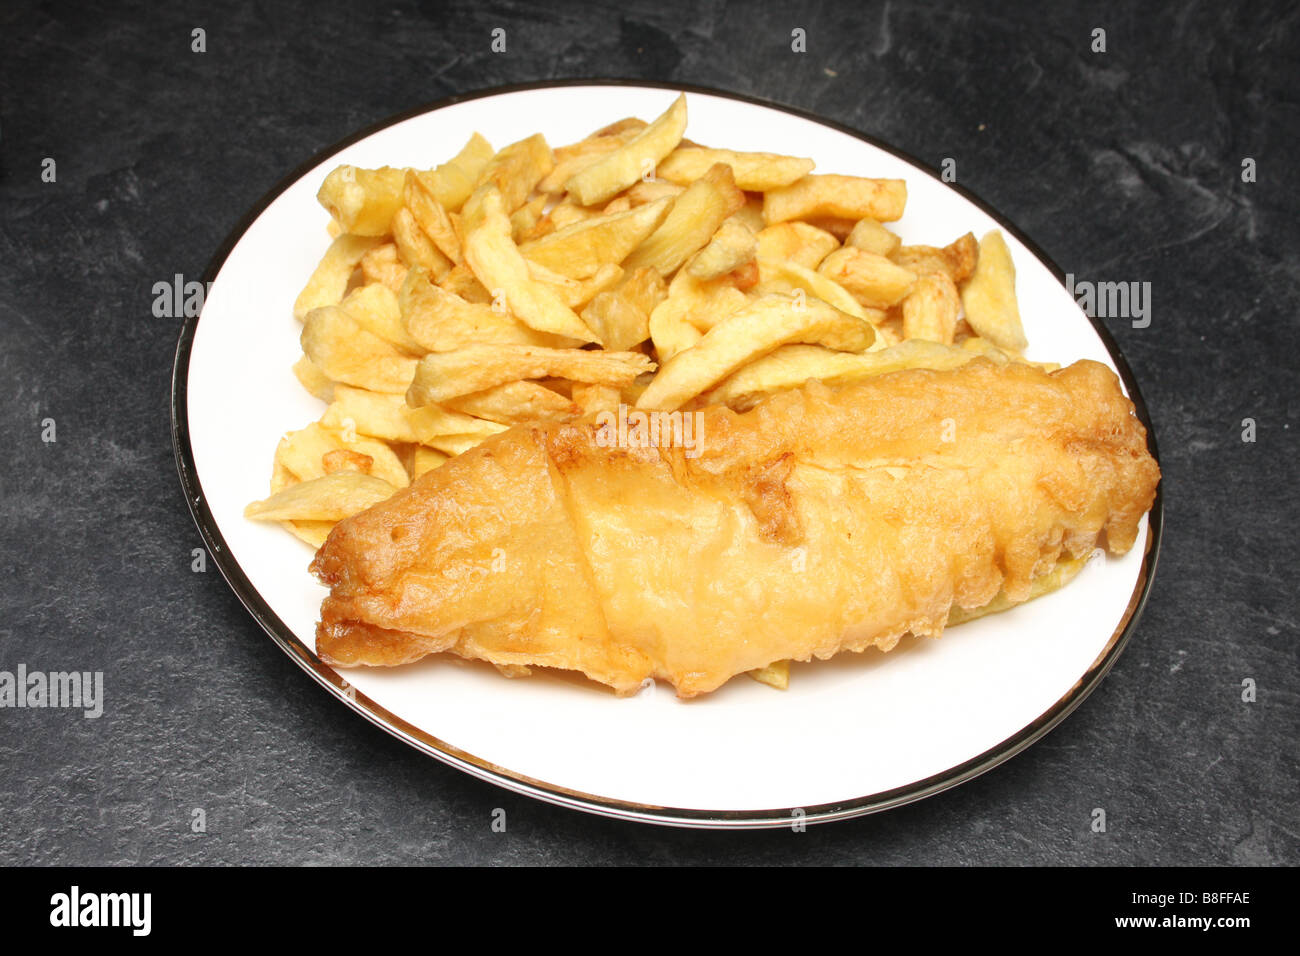 Fish and chips from a chip shop. Stock Photo